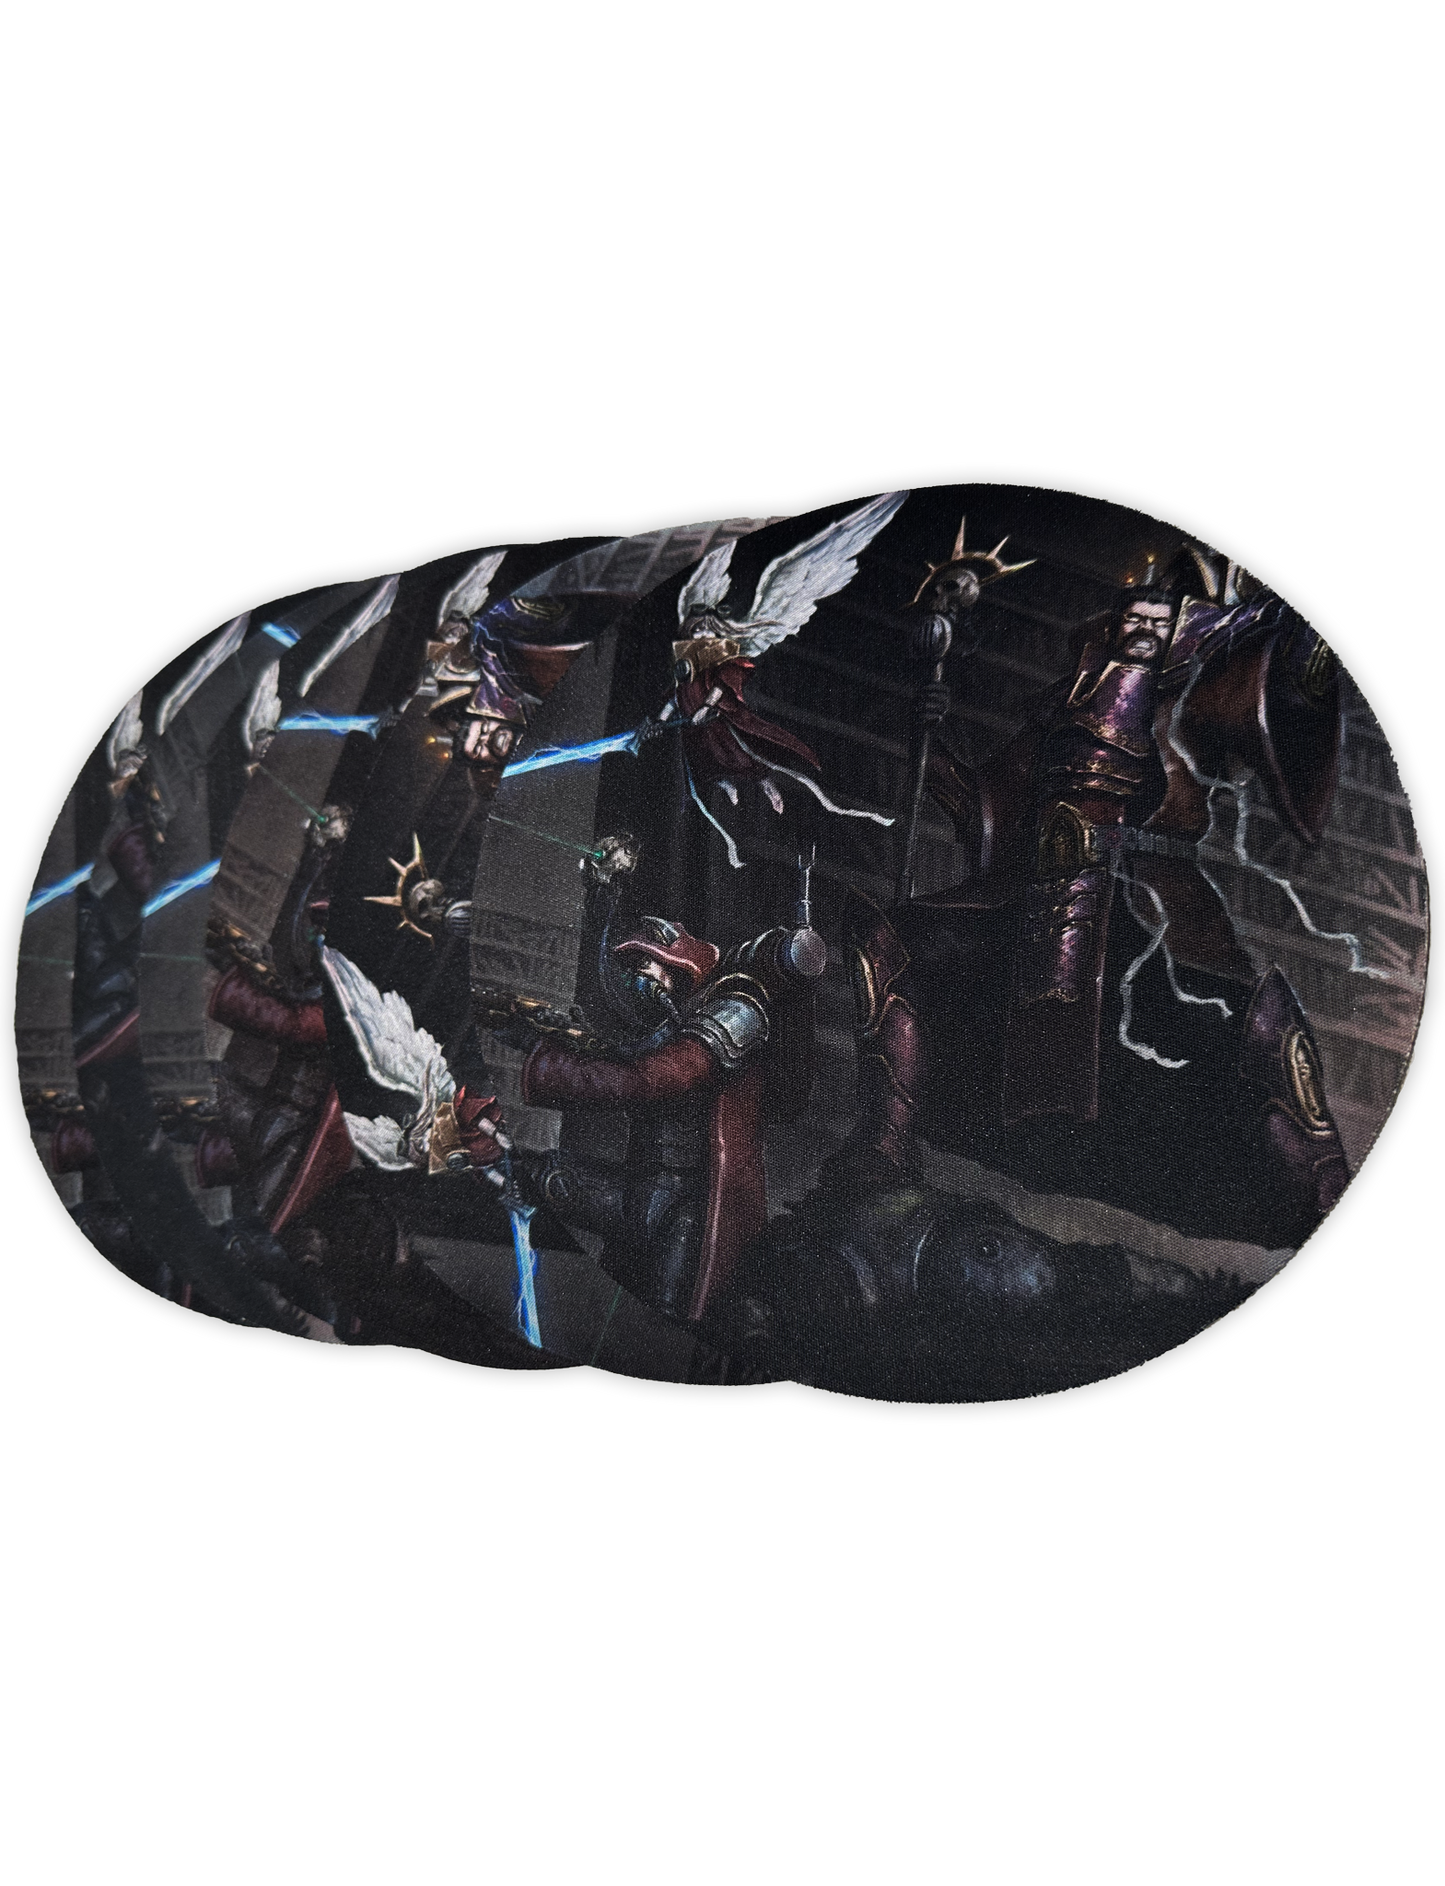 Adeptus Ridiculous Party Warhammer Mats - Pack of 6